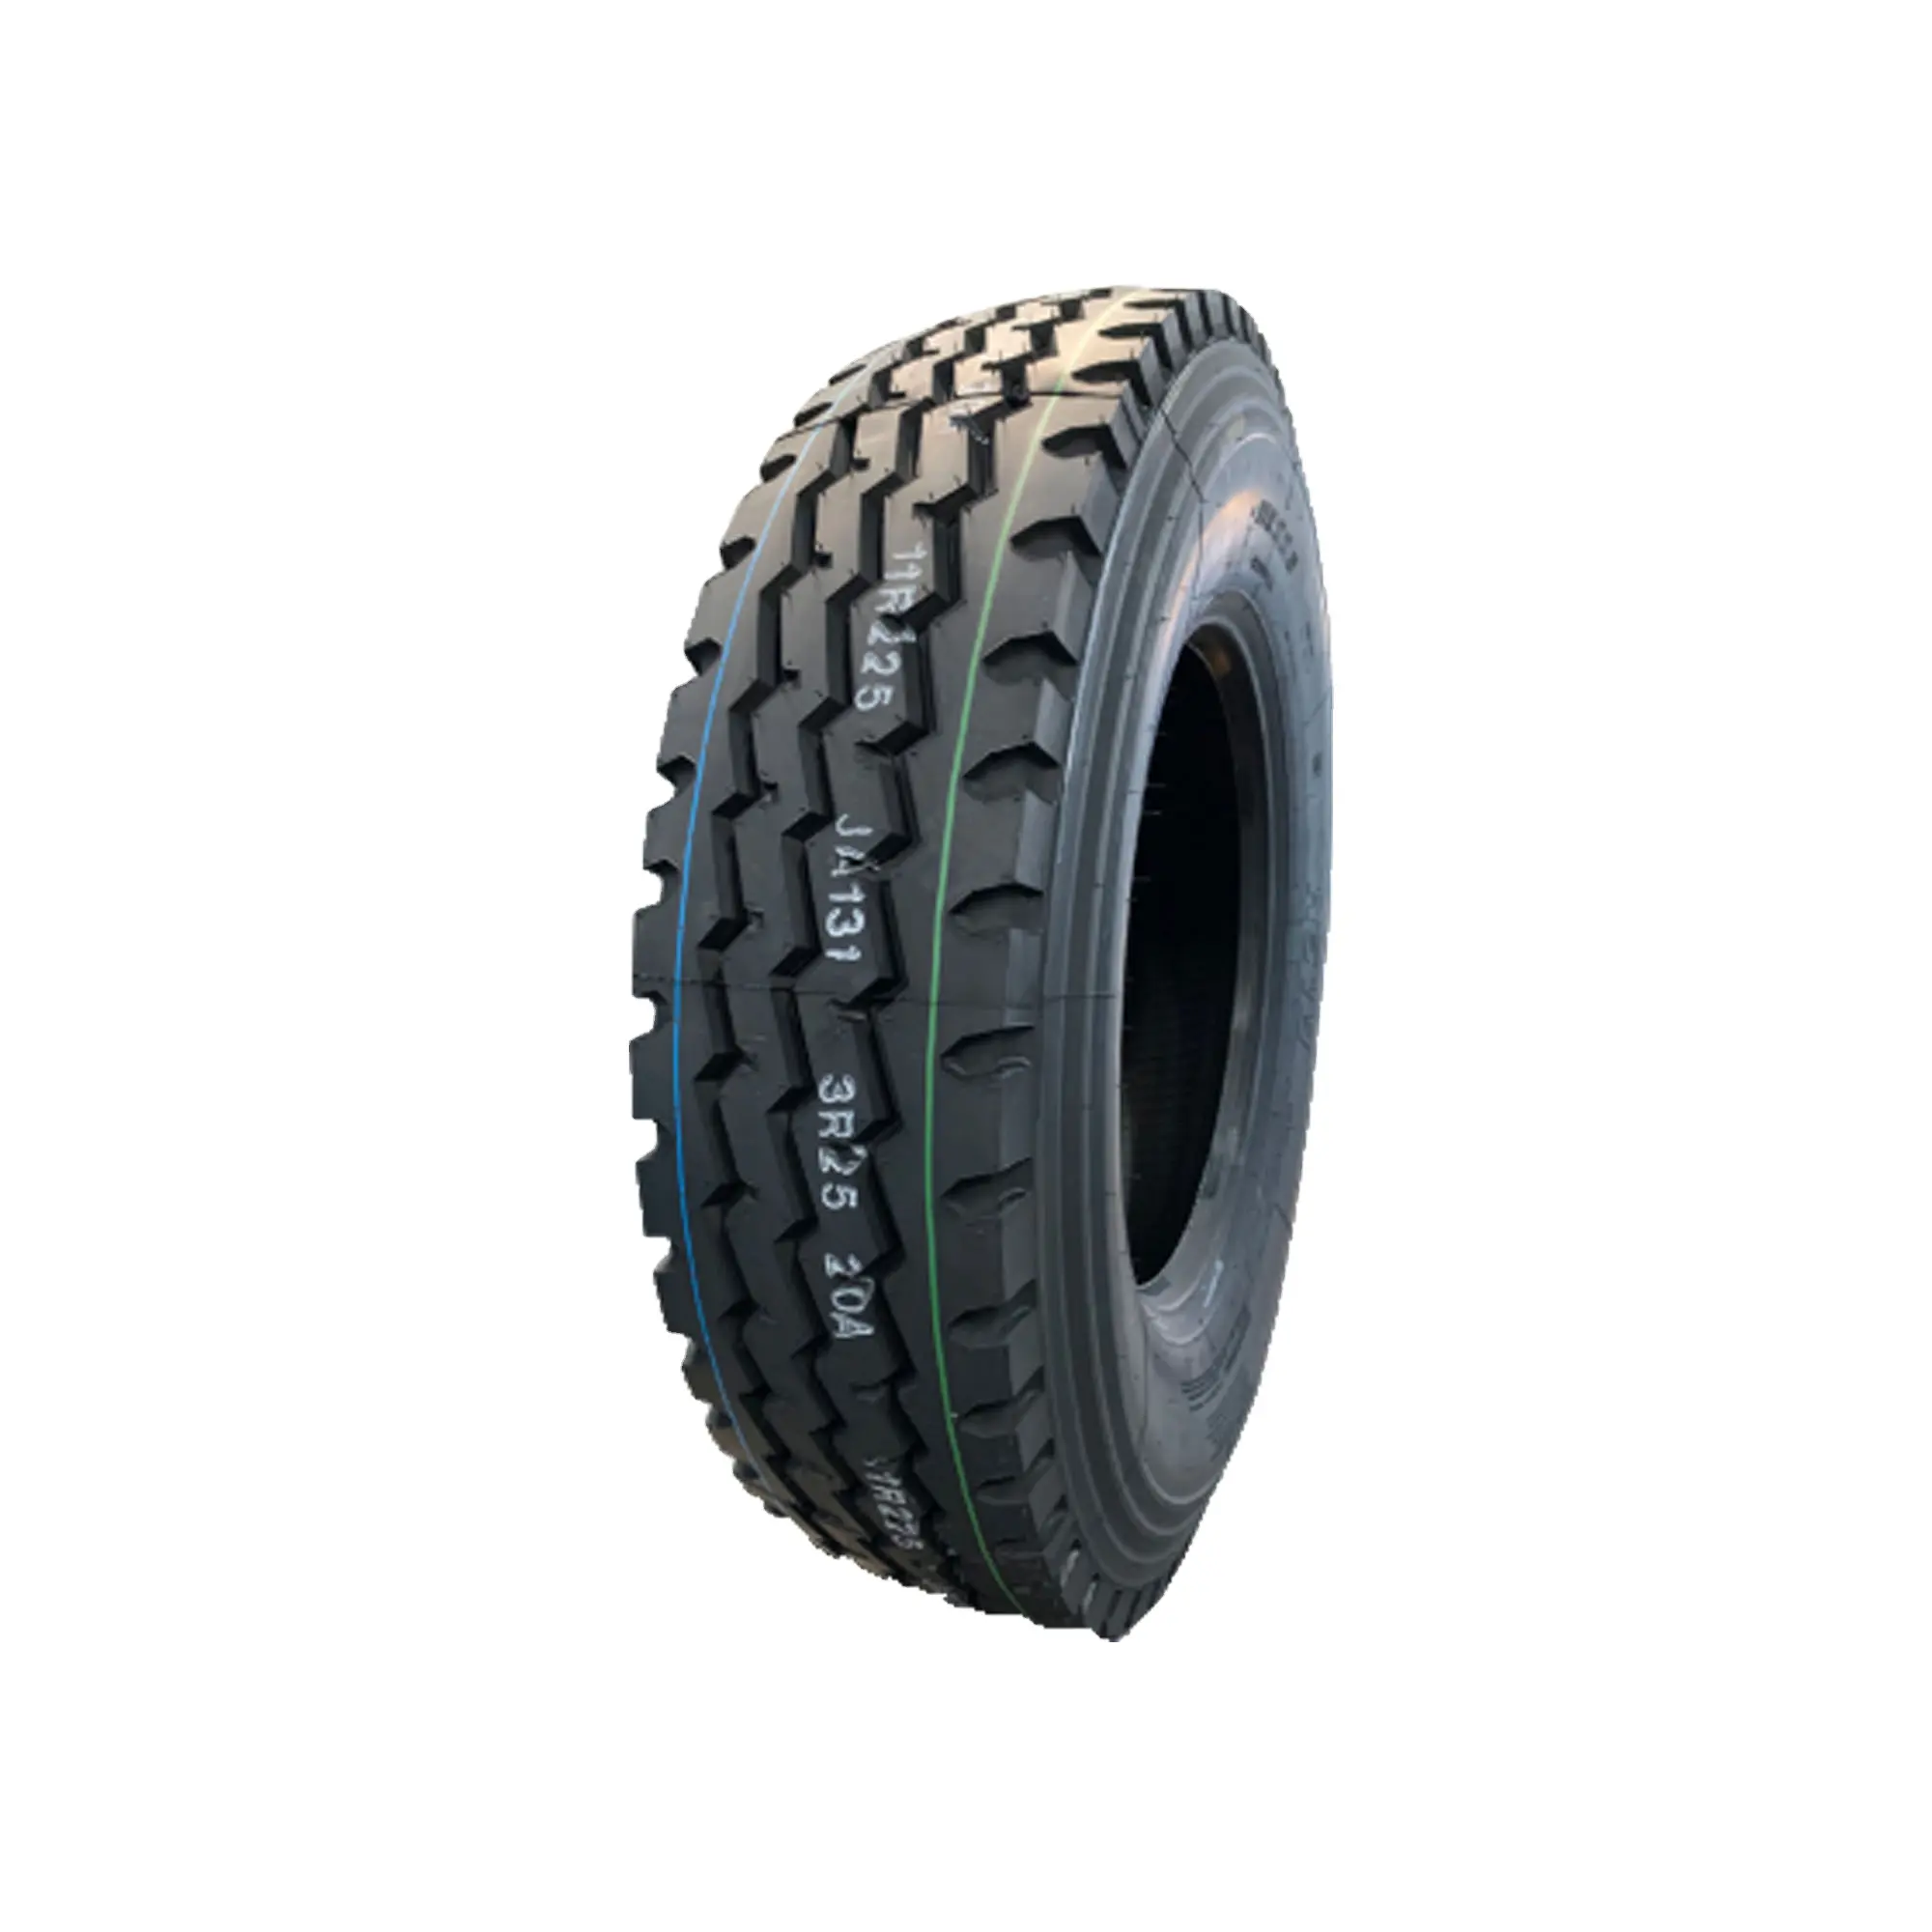 Helloway brand wholesale truck tires for Canada 11r24.5 11r 24.5 cheap price radial tbr